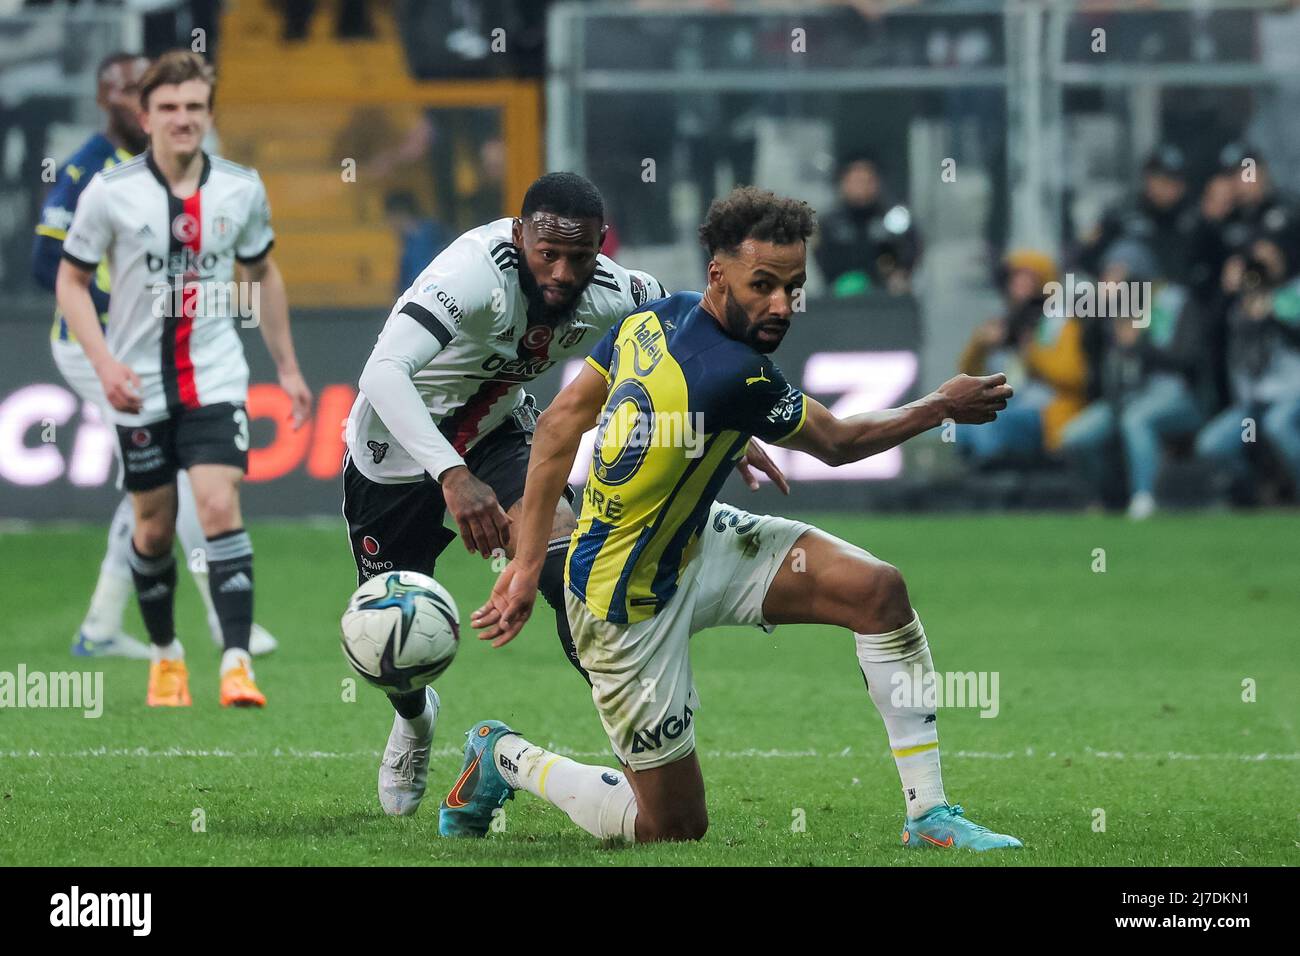 ISTANBUL, TURKEY - MAY 8: Georges-Kevin N'Koudou of Besiktas JK and Nazım Sangare of Fenerbahce SK battle for possession during the Turkish Super Lig match between Besiktas JK and Fenerbahce SK at Vodafone Park on May 8, 2022 in Istanbul, Turkey (Photo by Orange Pictures) Stock Photo